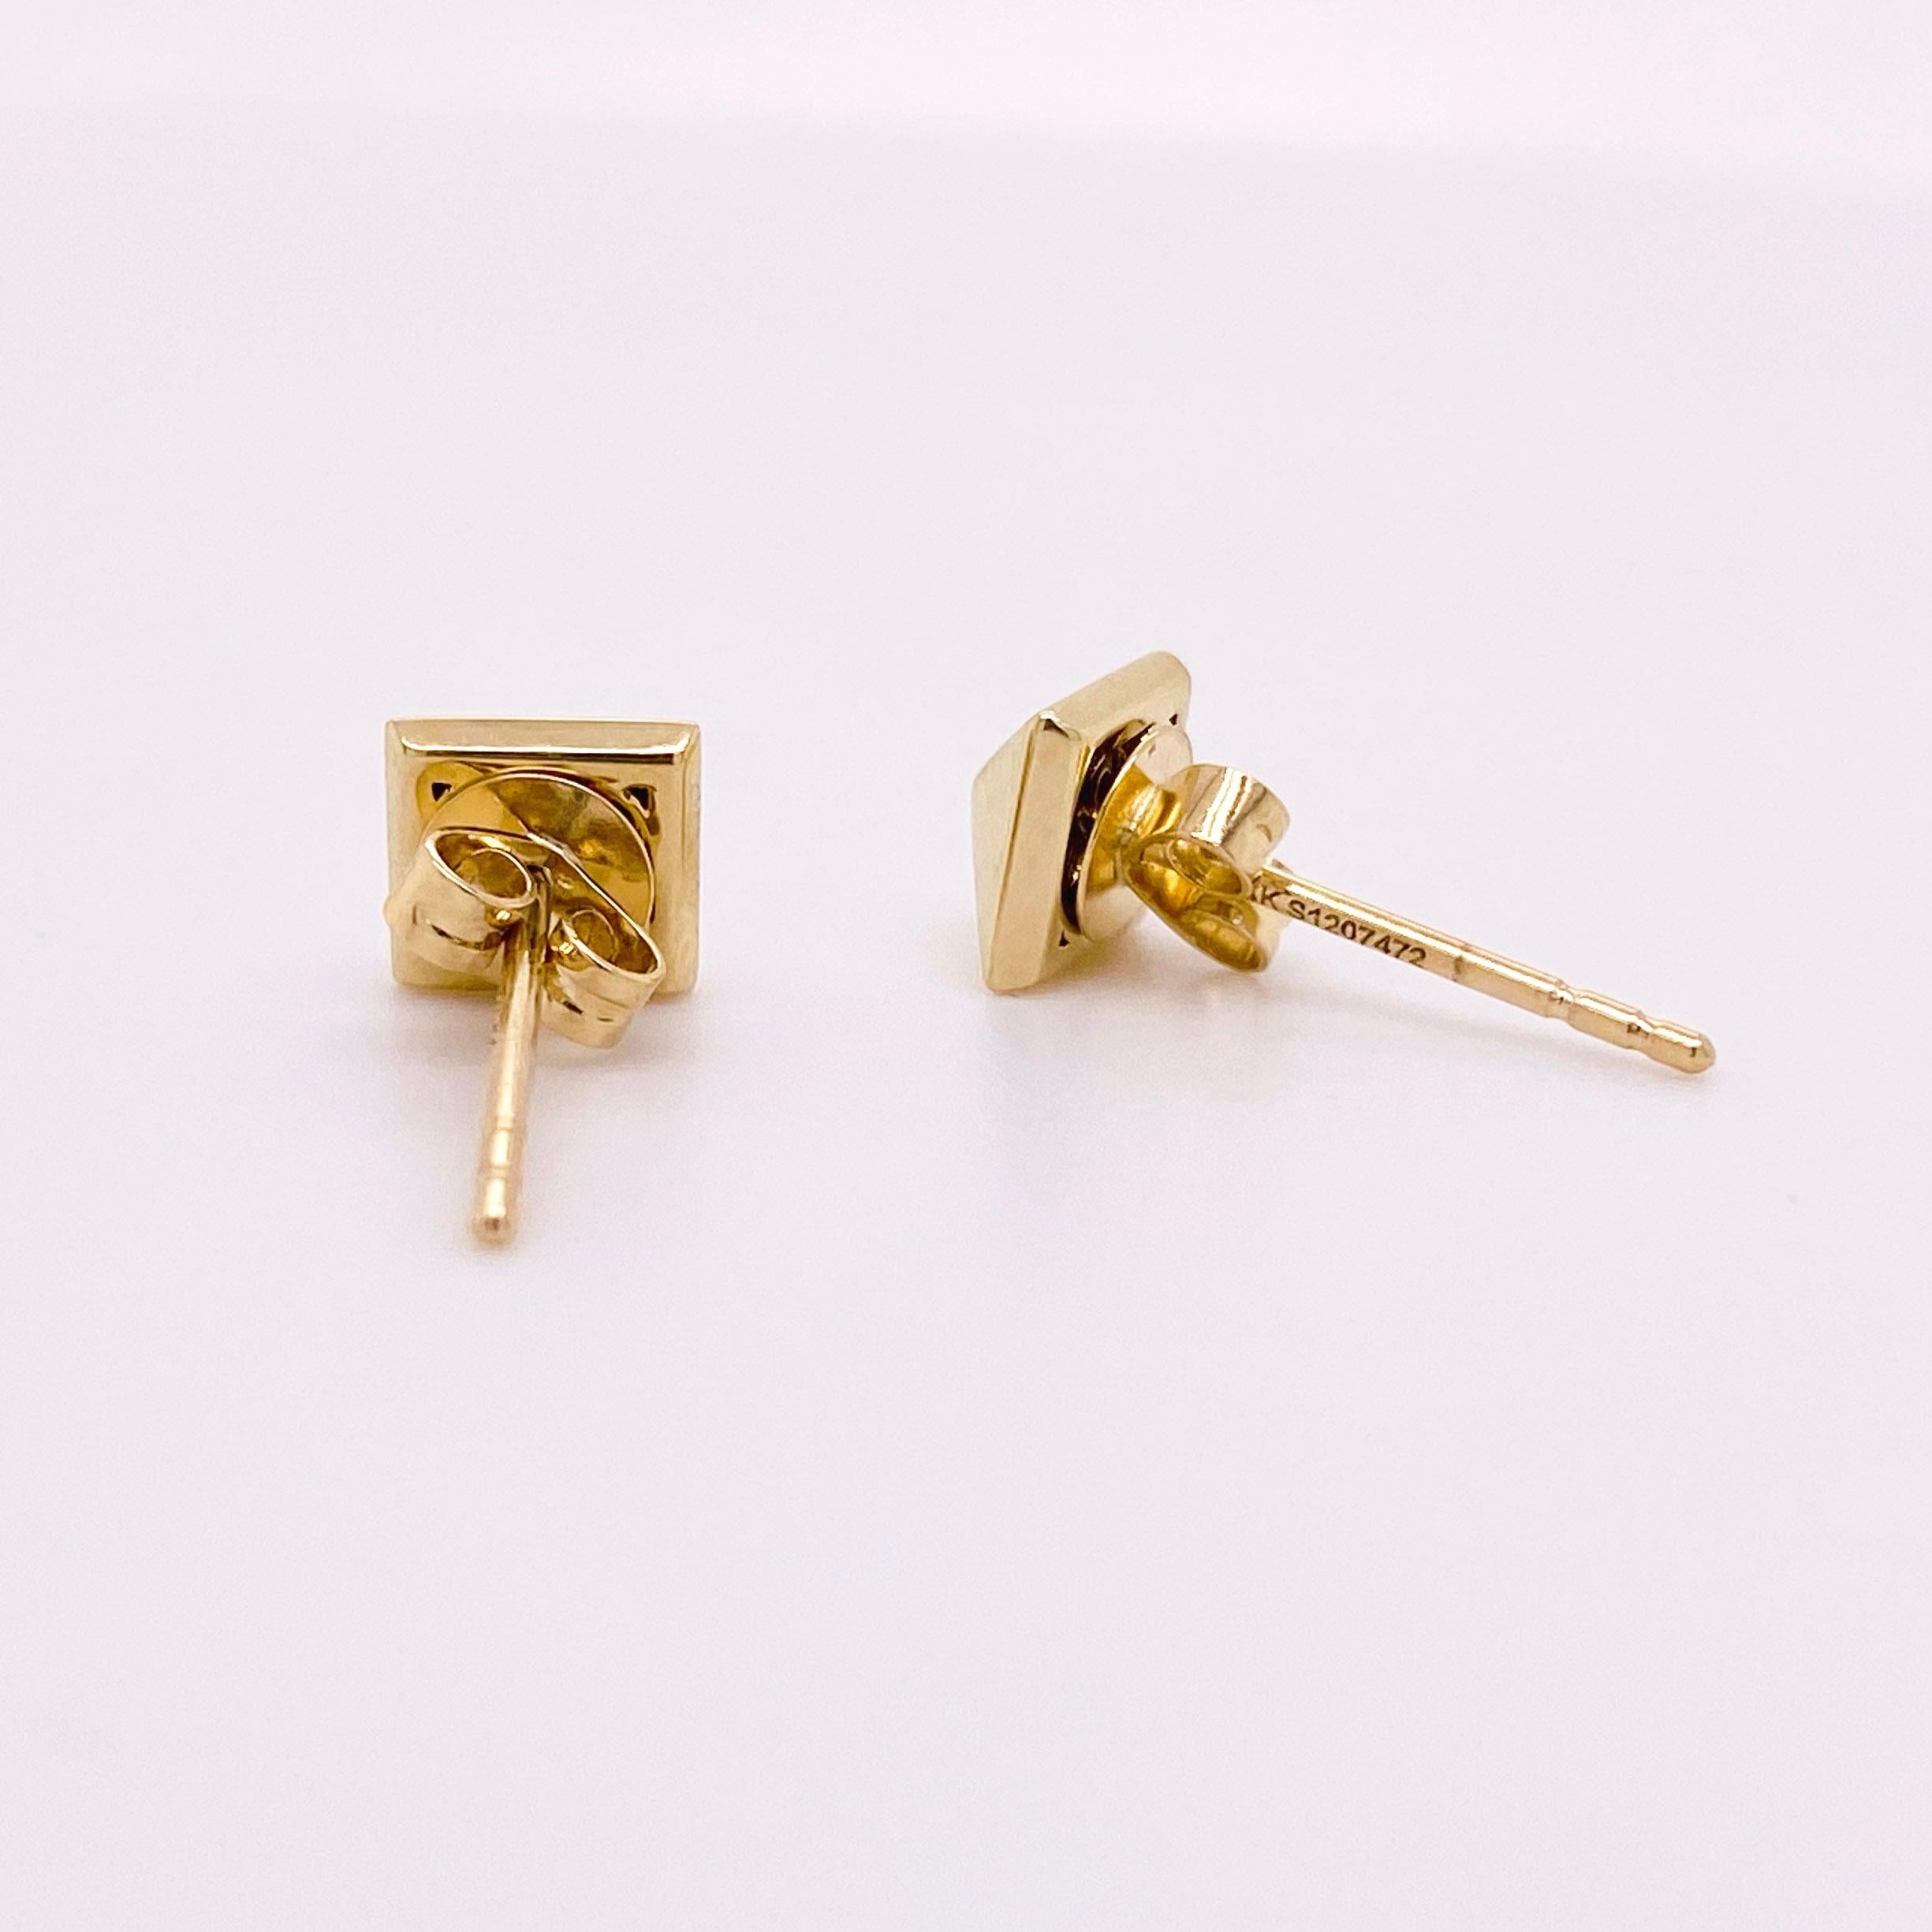 Square Pyramid Earrings, 14 Karat Yellow Gold Pyramid Stud Earrings, Post Square For Sale 1